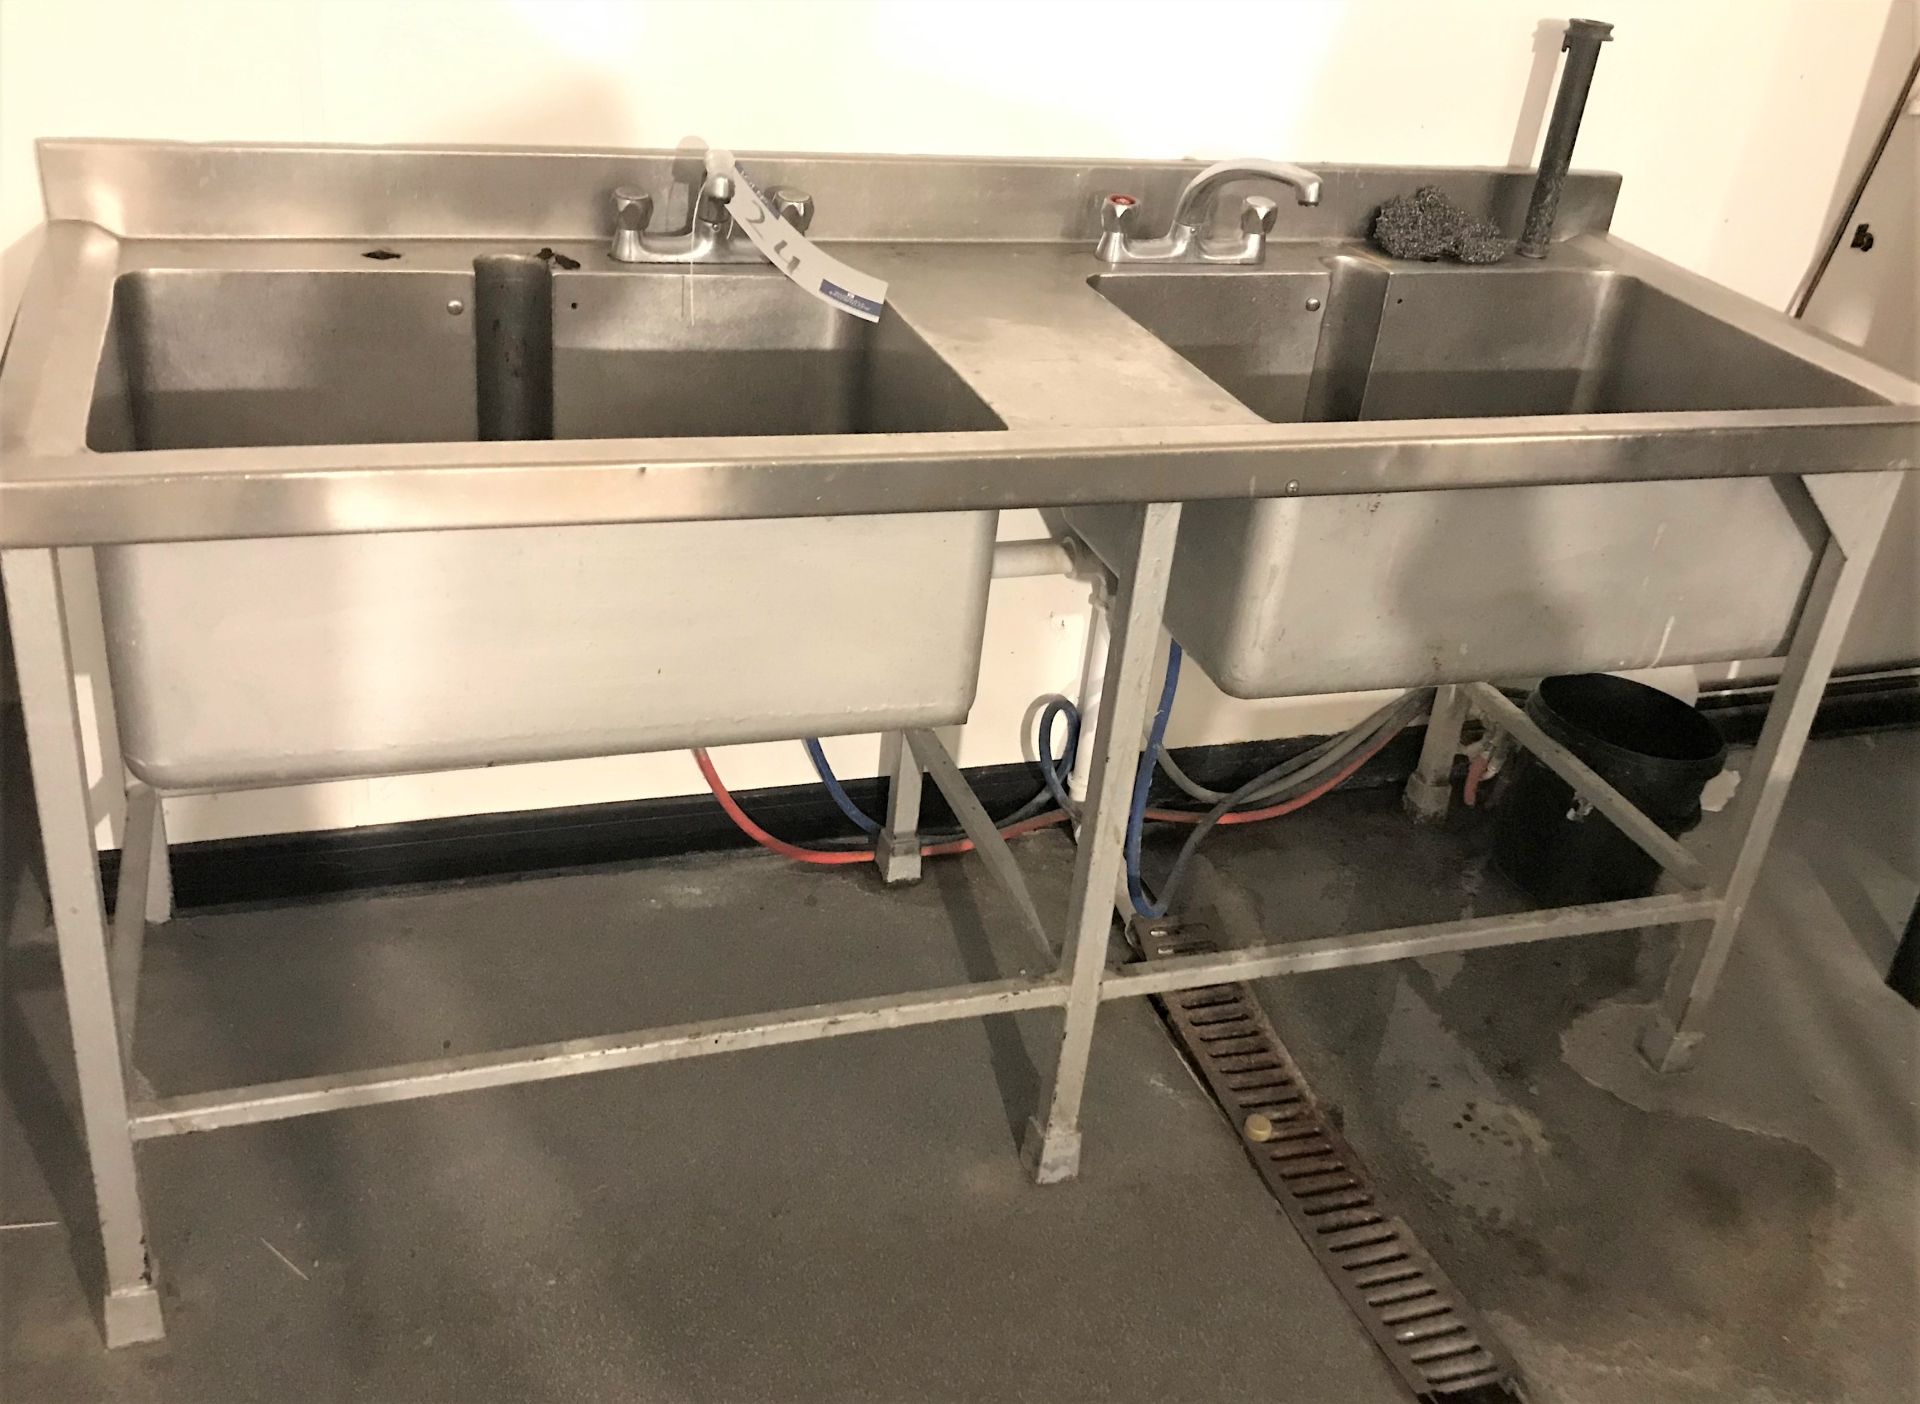 A Stainless Steel Double Bowl Sink Unit, 1900 x 70